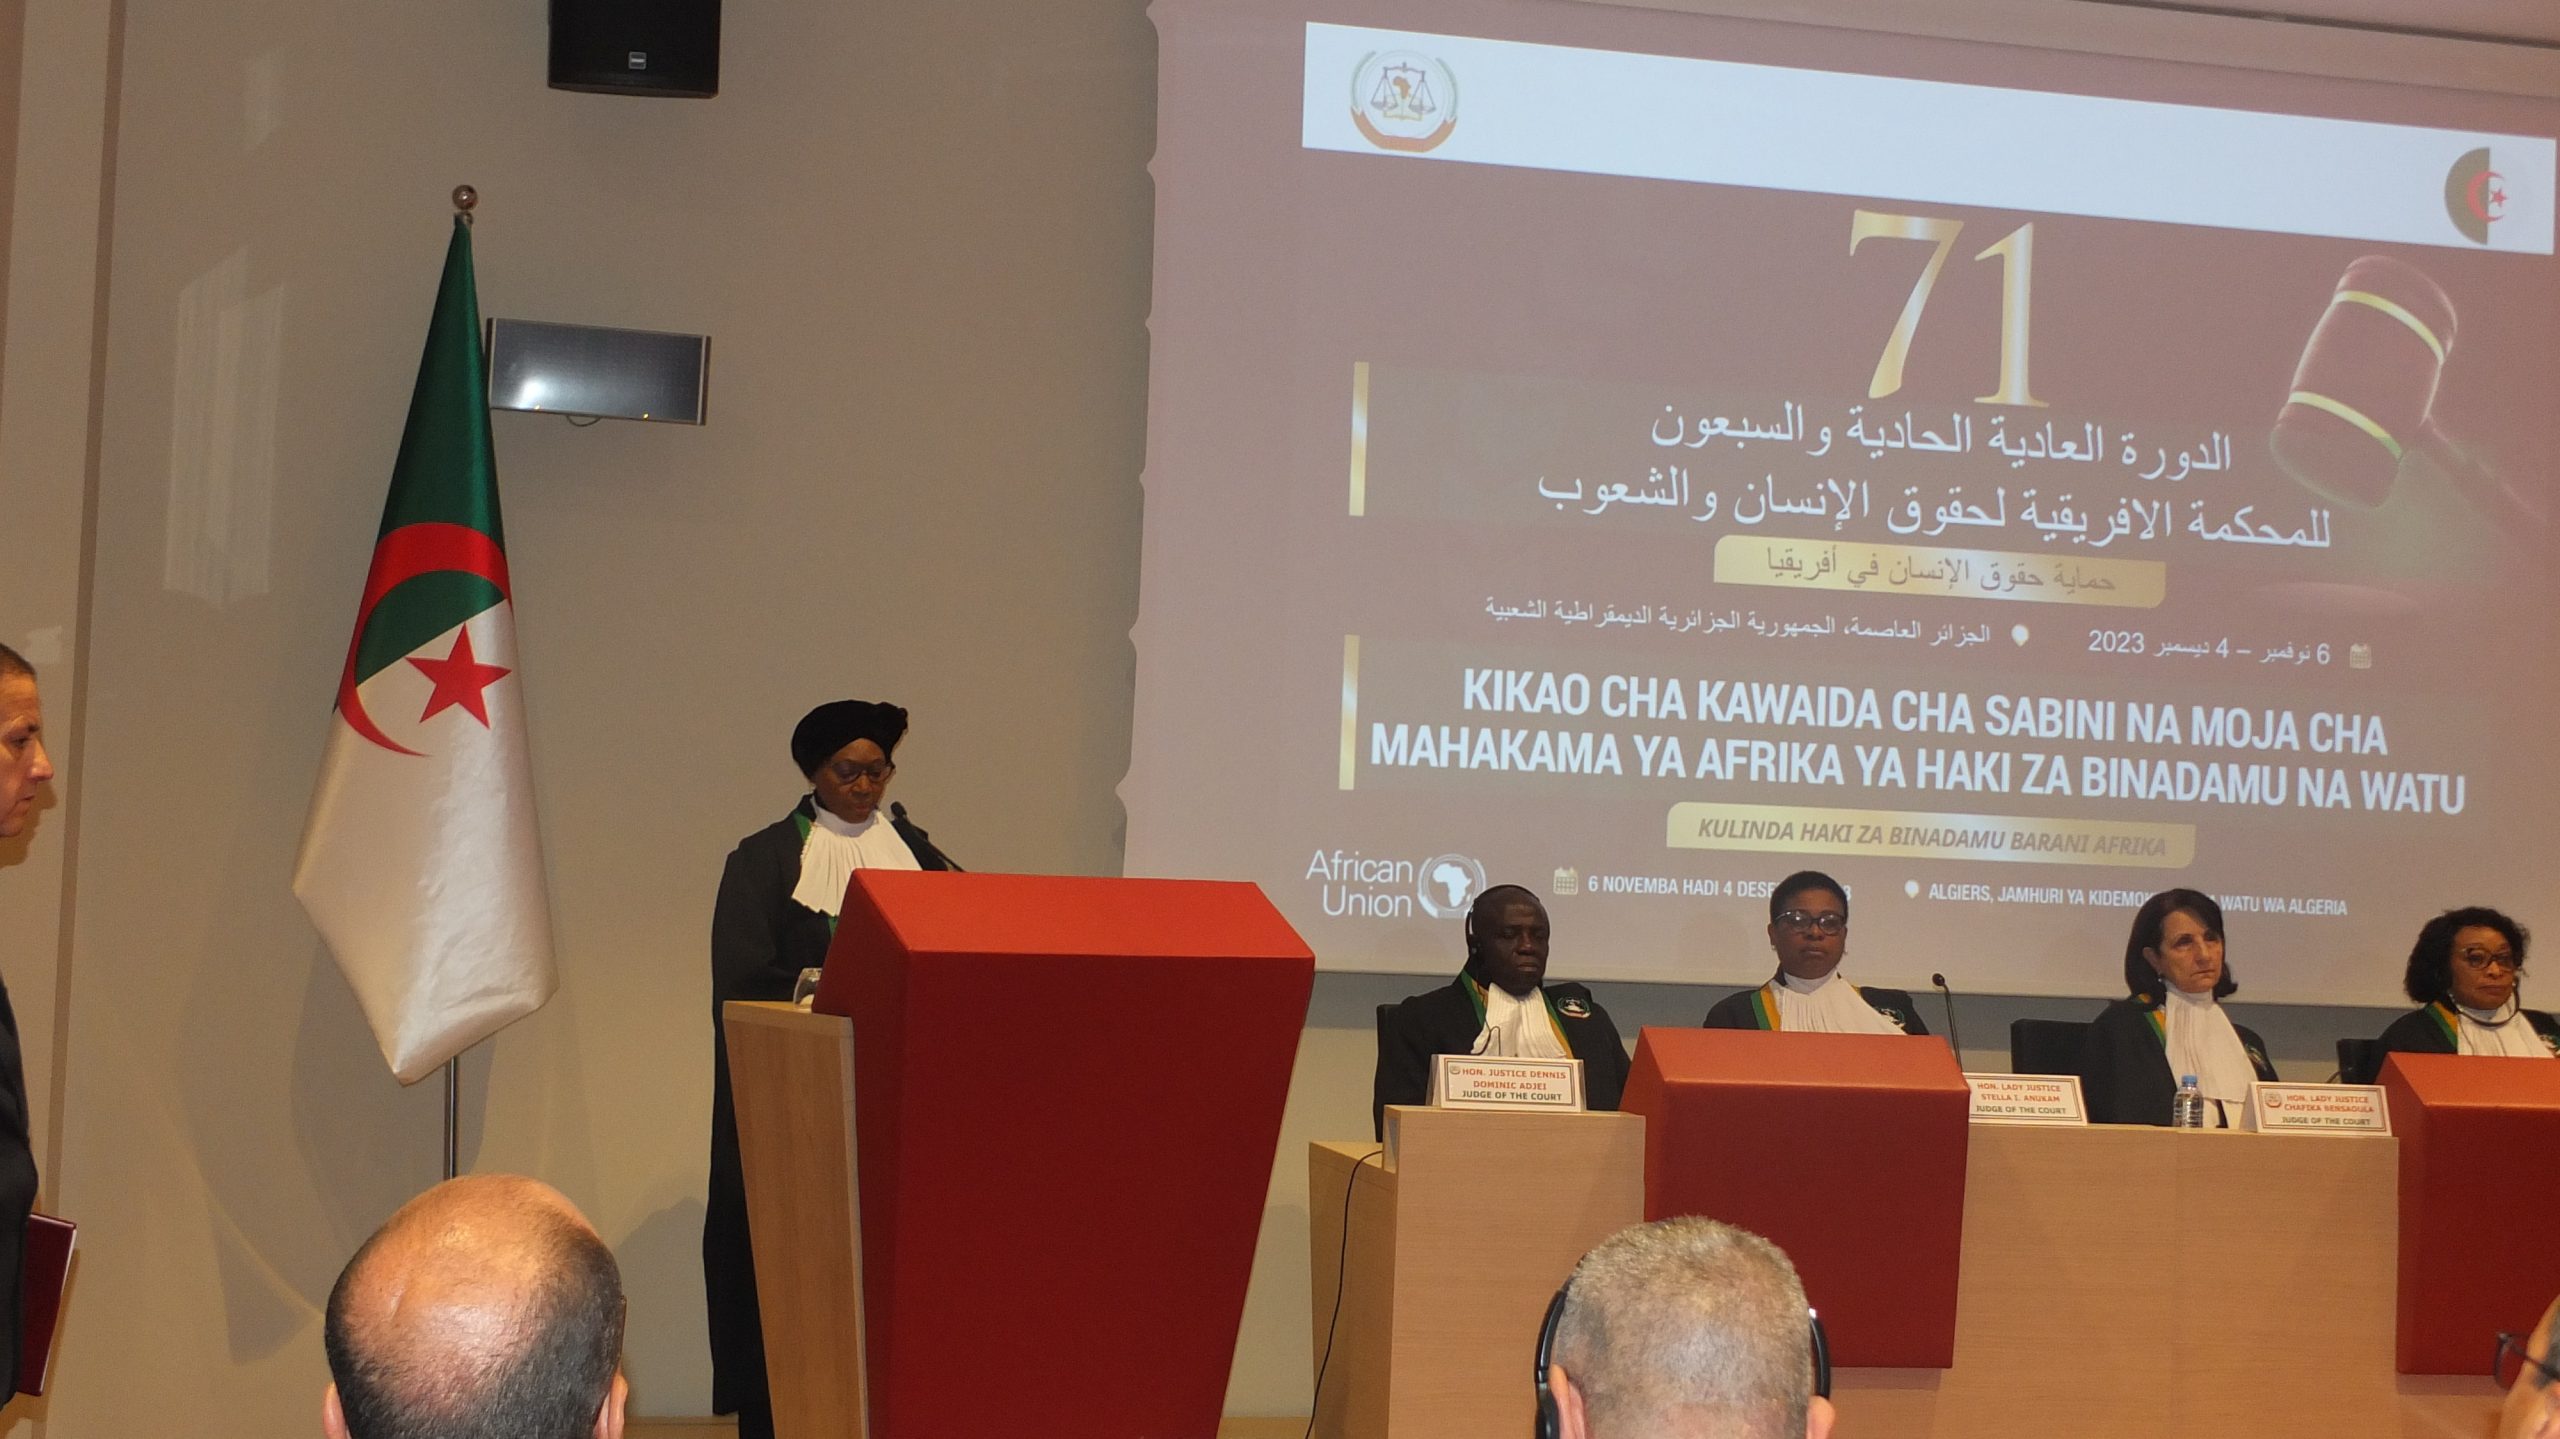 OPENING SPEECH OF HON. LADY JUSTICE IMANI D. ABOUD, PRESIDENT OF THE AFRICAN COURT ON THE OCCASION OF THE 71ST ORDINARY SESSION OF THE COURT.